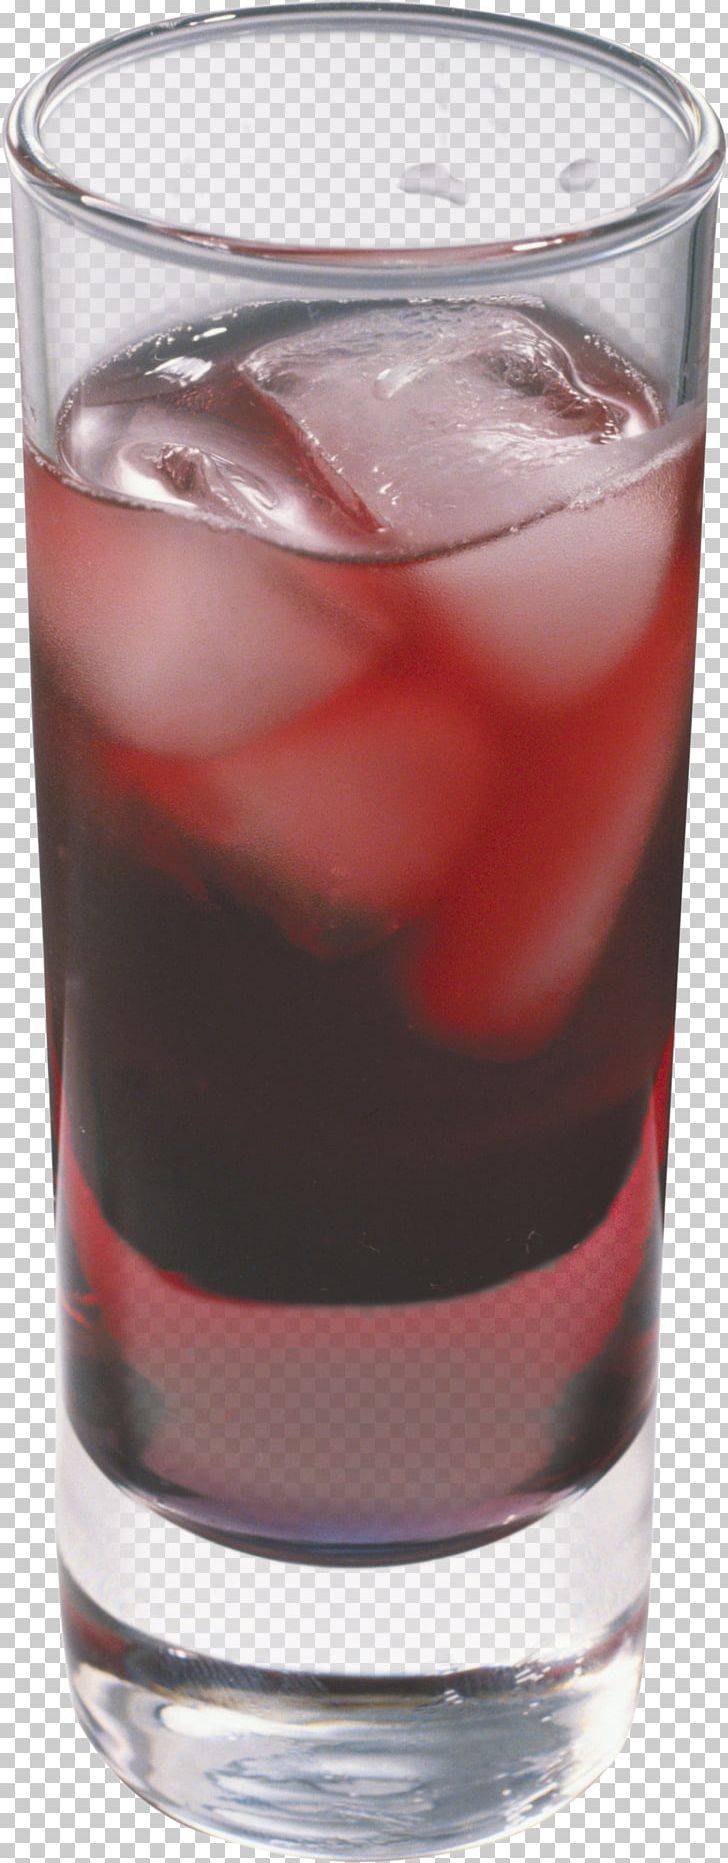 Cocktail Garnish Sea Breeze Fizzy Drinks Negroni PNG, Clipart, Bay Breeze, Black Russian, Cocktail, Cocktail Garnish, Cuba Libre Free PNG Download